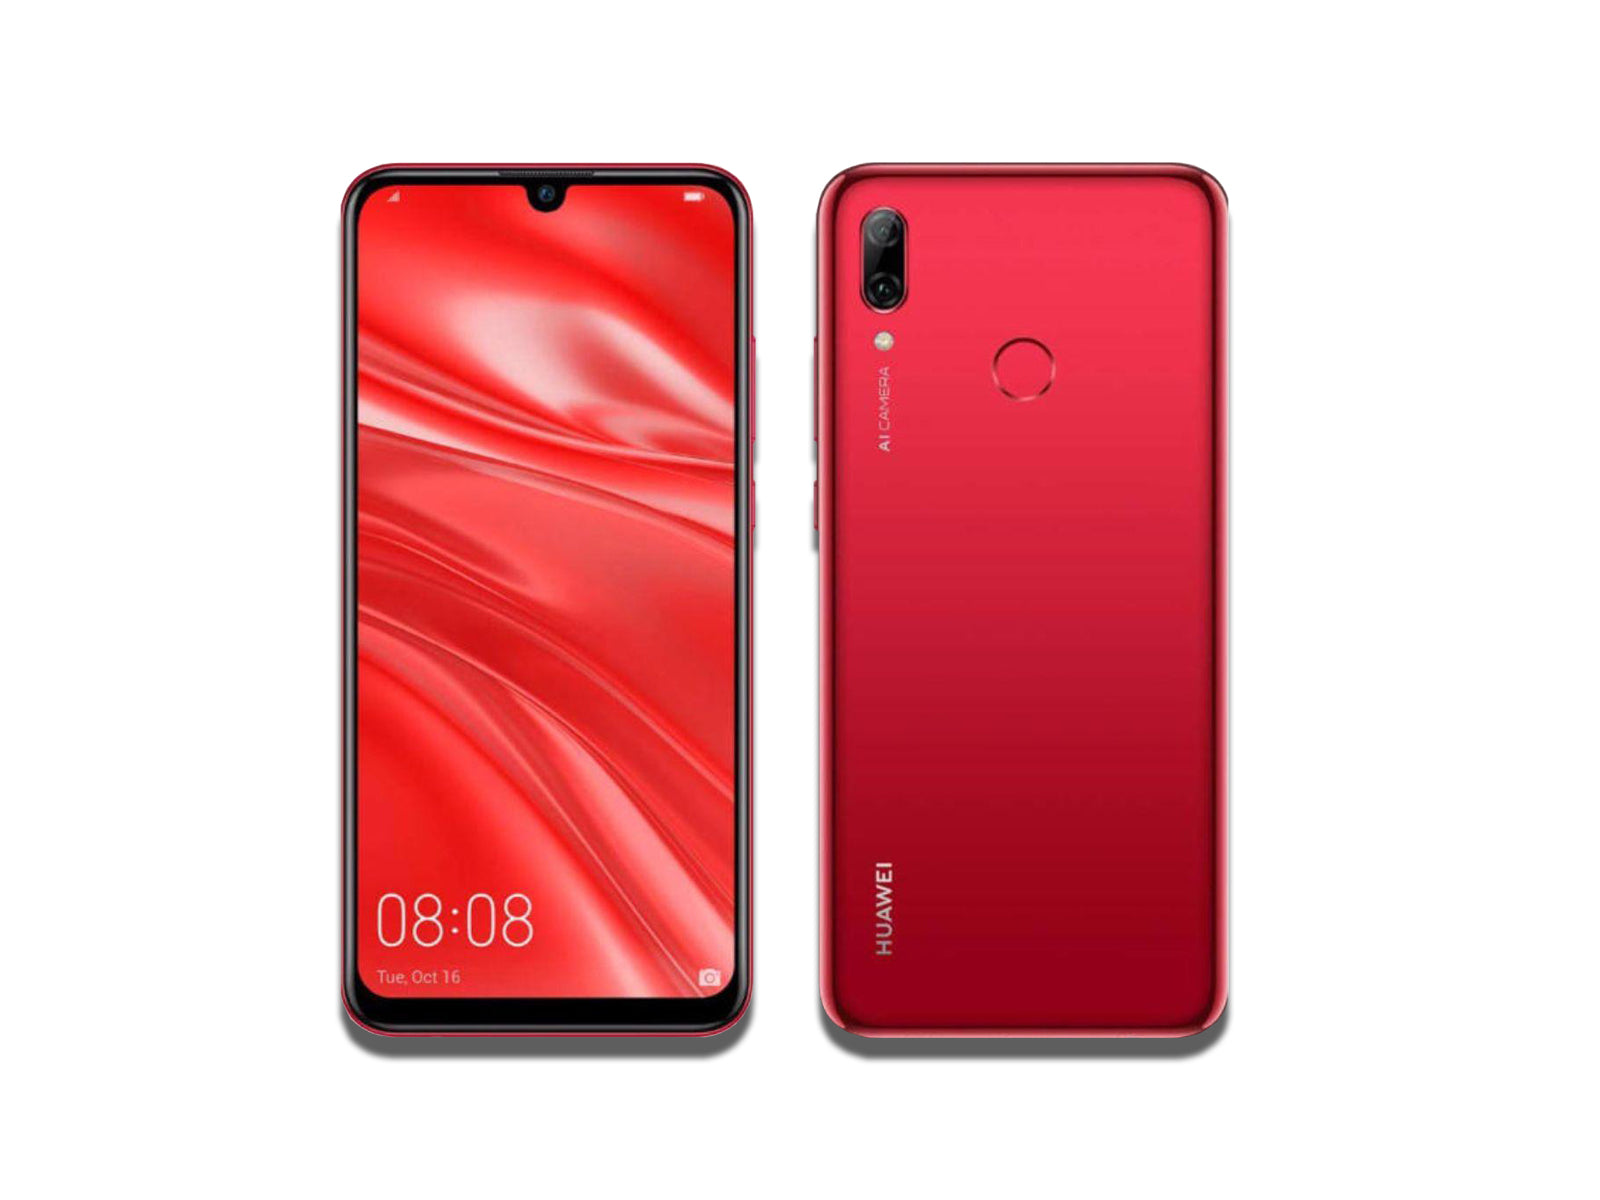 Image Showing Red Colour Variant of The Huawei Nova 3 on The White Background